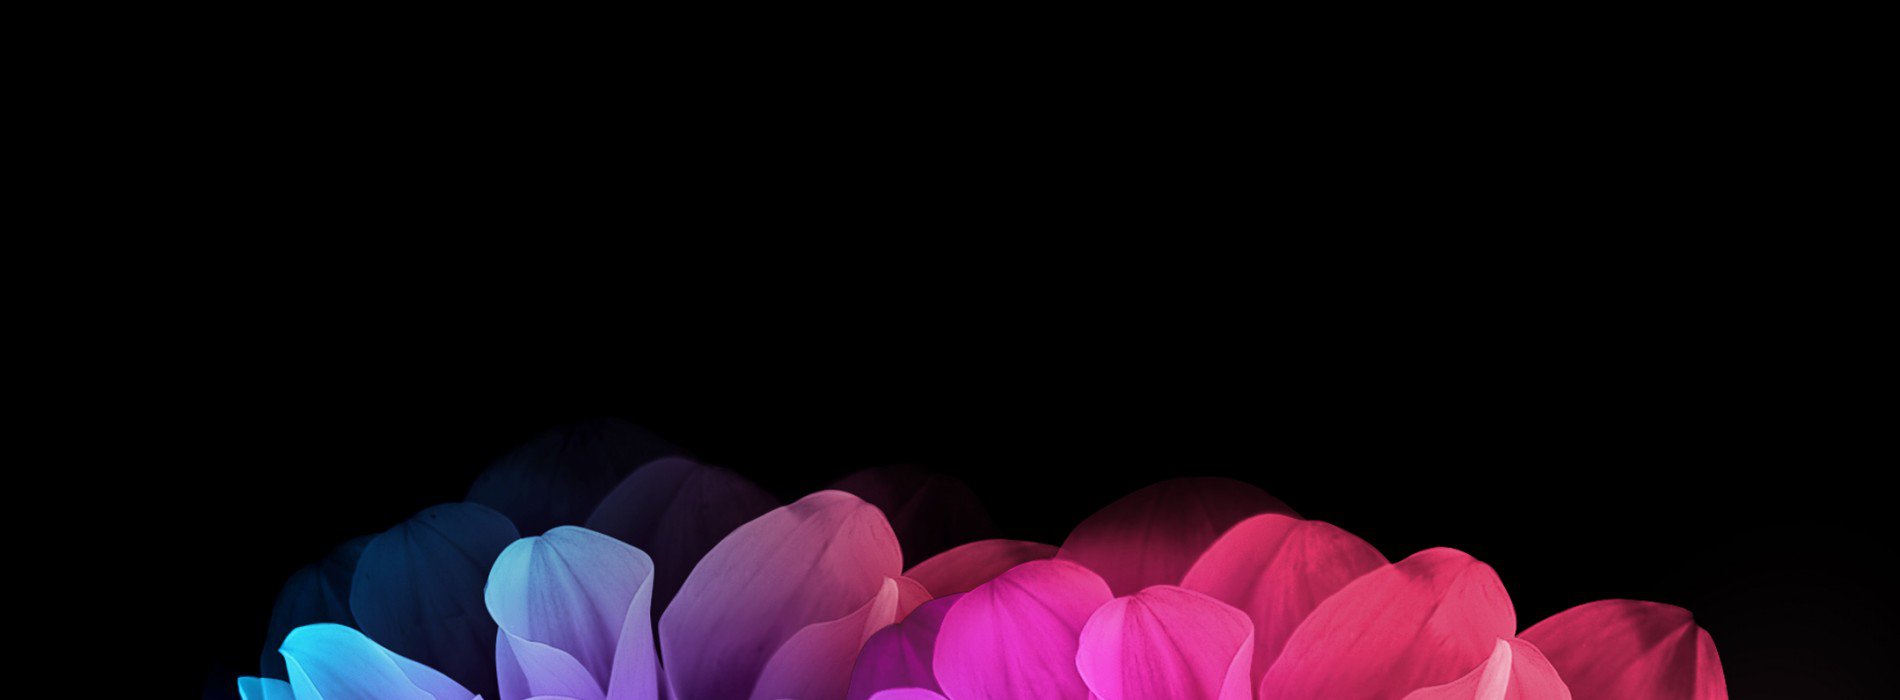 And Eye Popping QHD 1440p Wallpaper Specifically For Amoled Displays